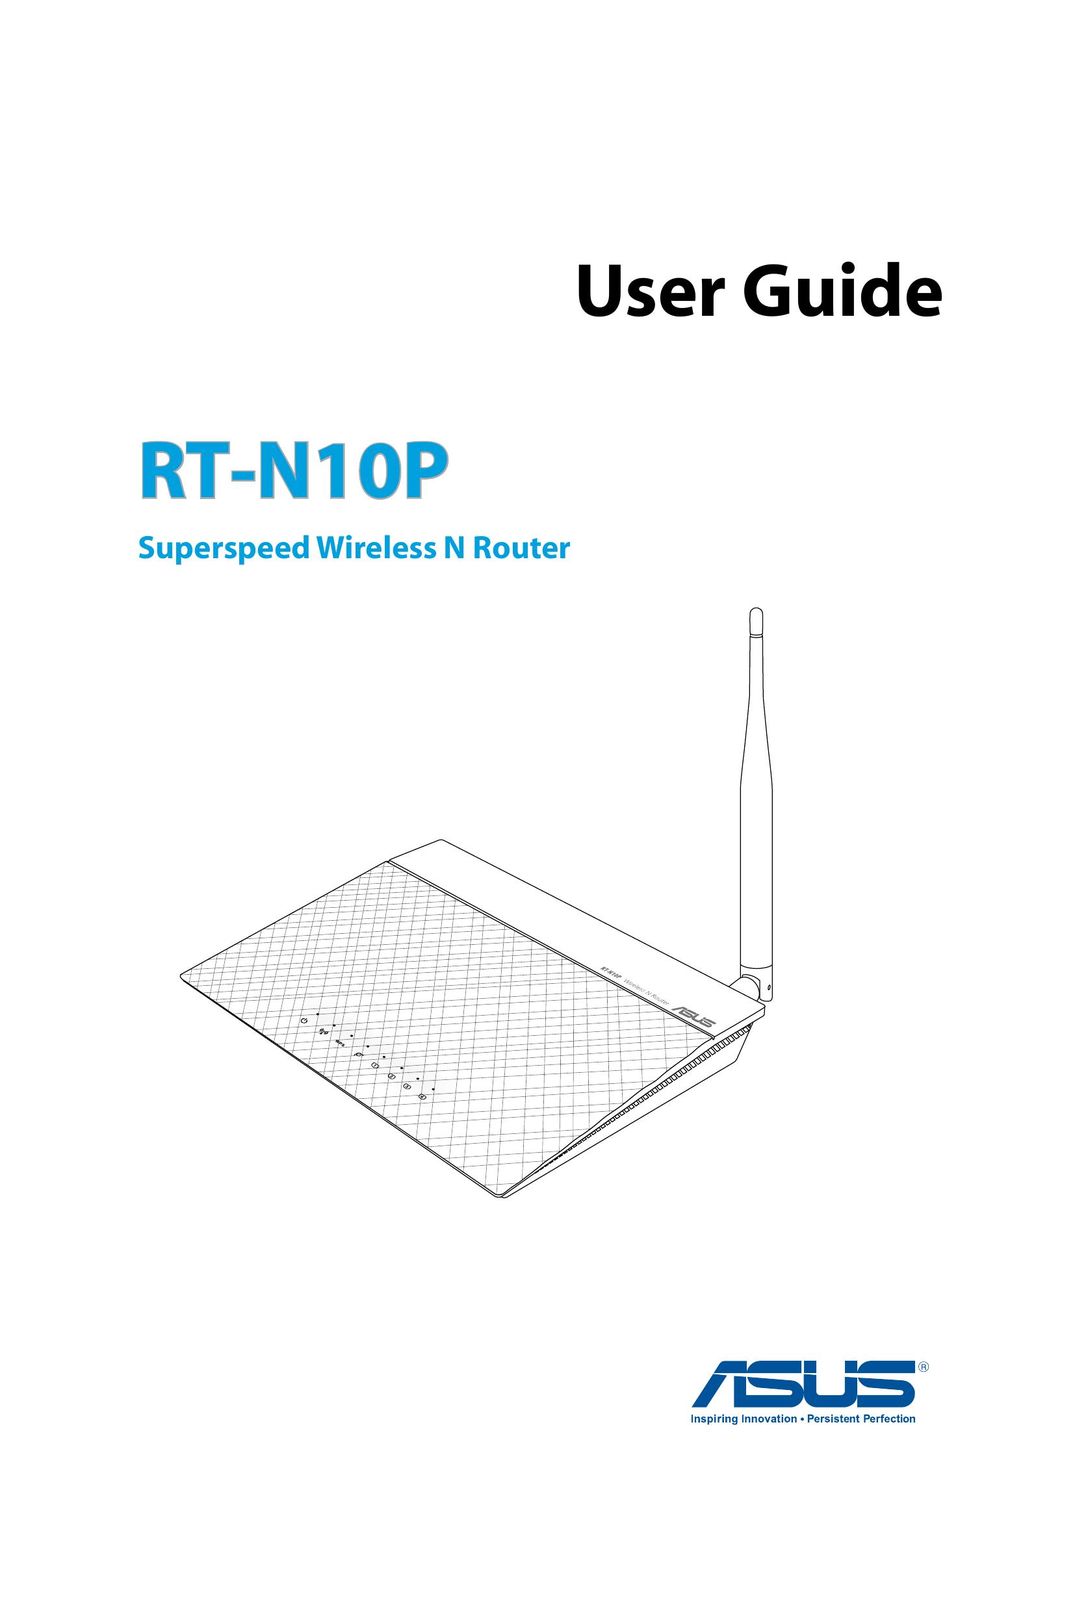 Asus RT-N10P Network Router User Manual